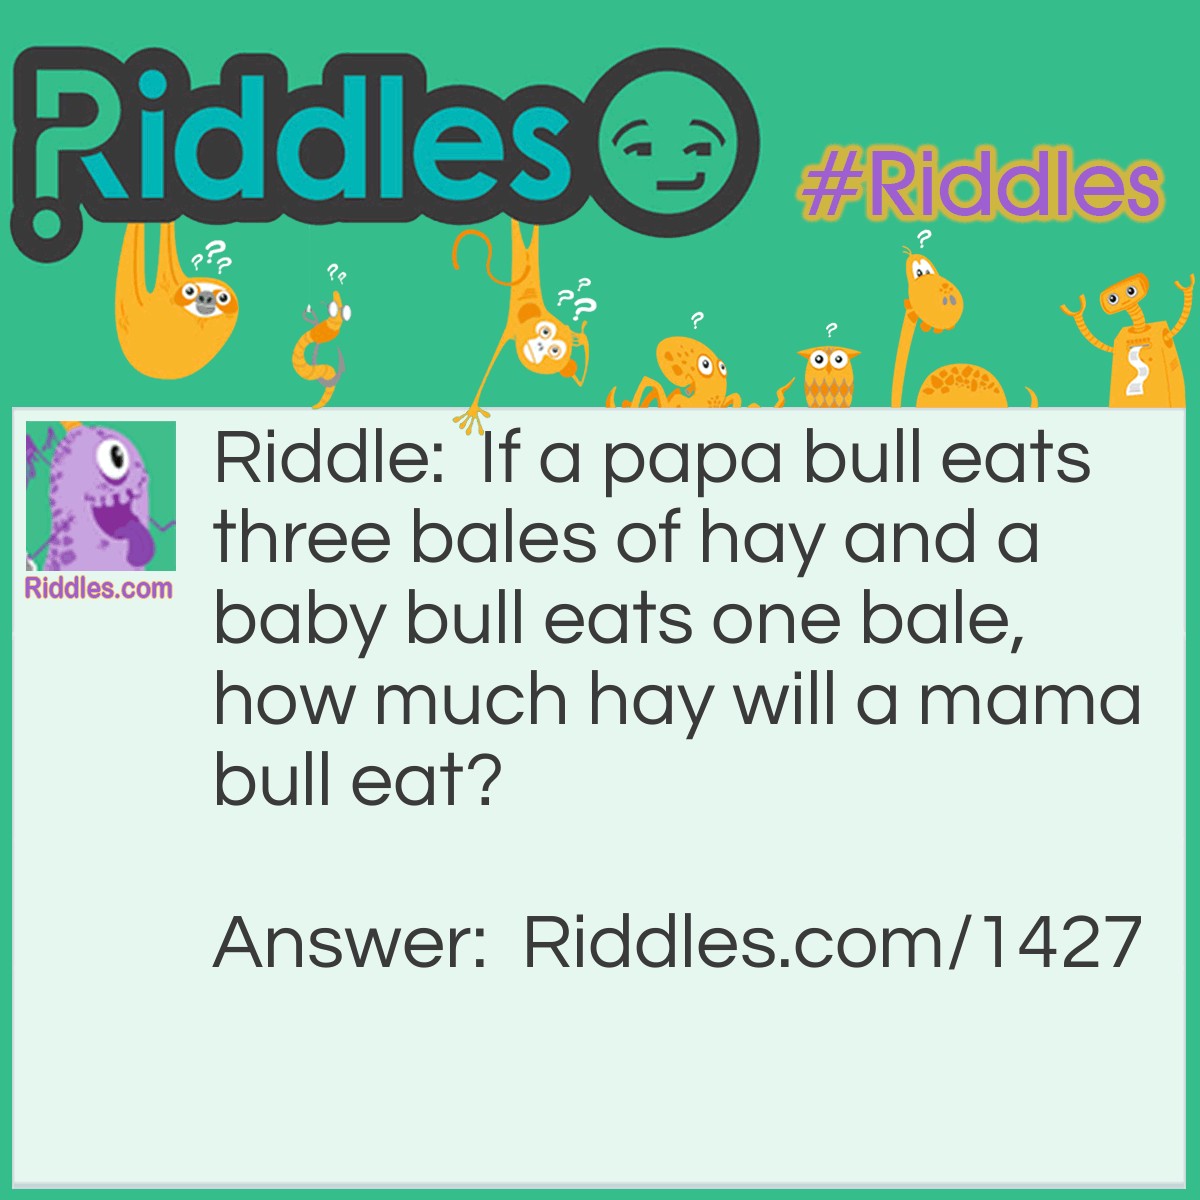 Riddle: If a papa bull eats three bales of hay and a baby bull eats one bale, how much hay will a mama bull eat? Answer: Nothing. There is no such thing as a mama bull.